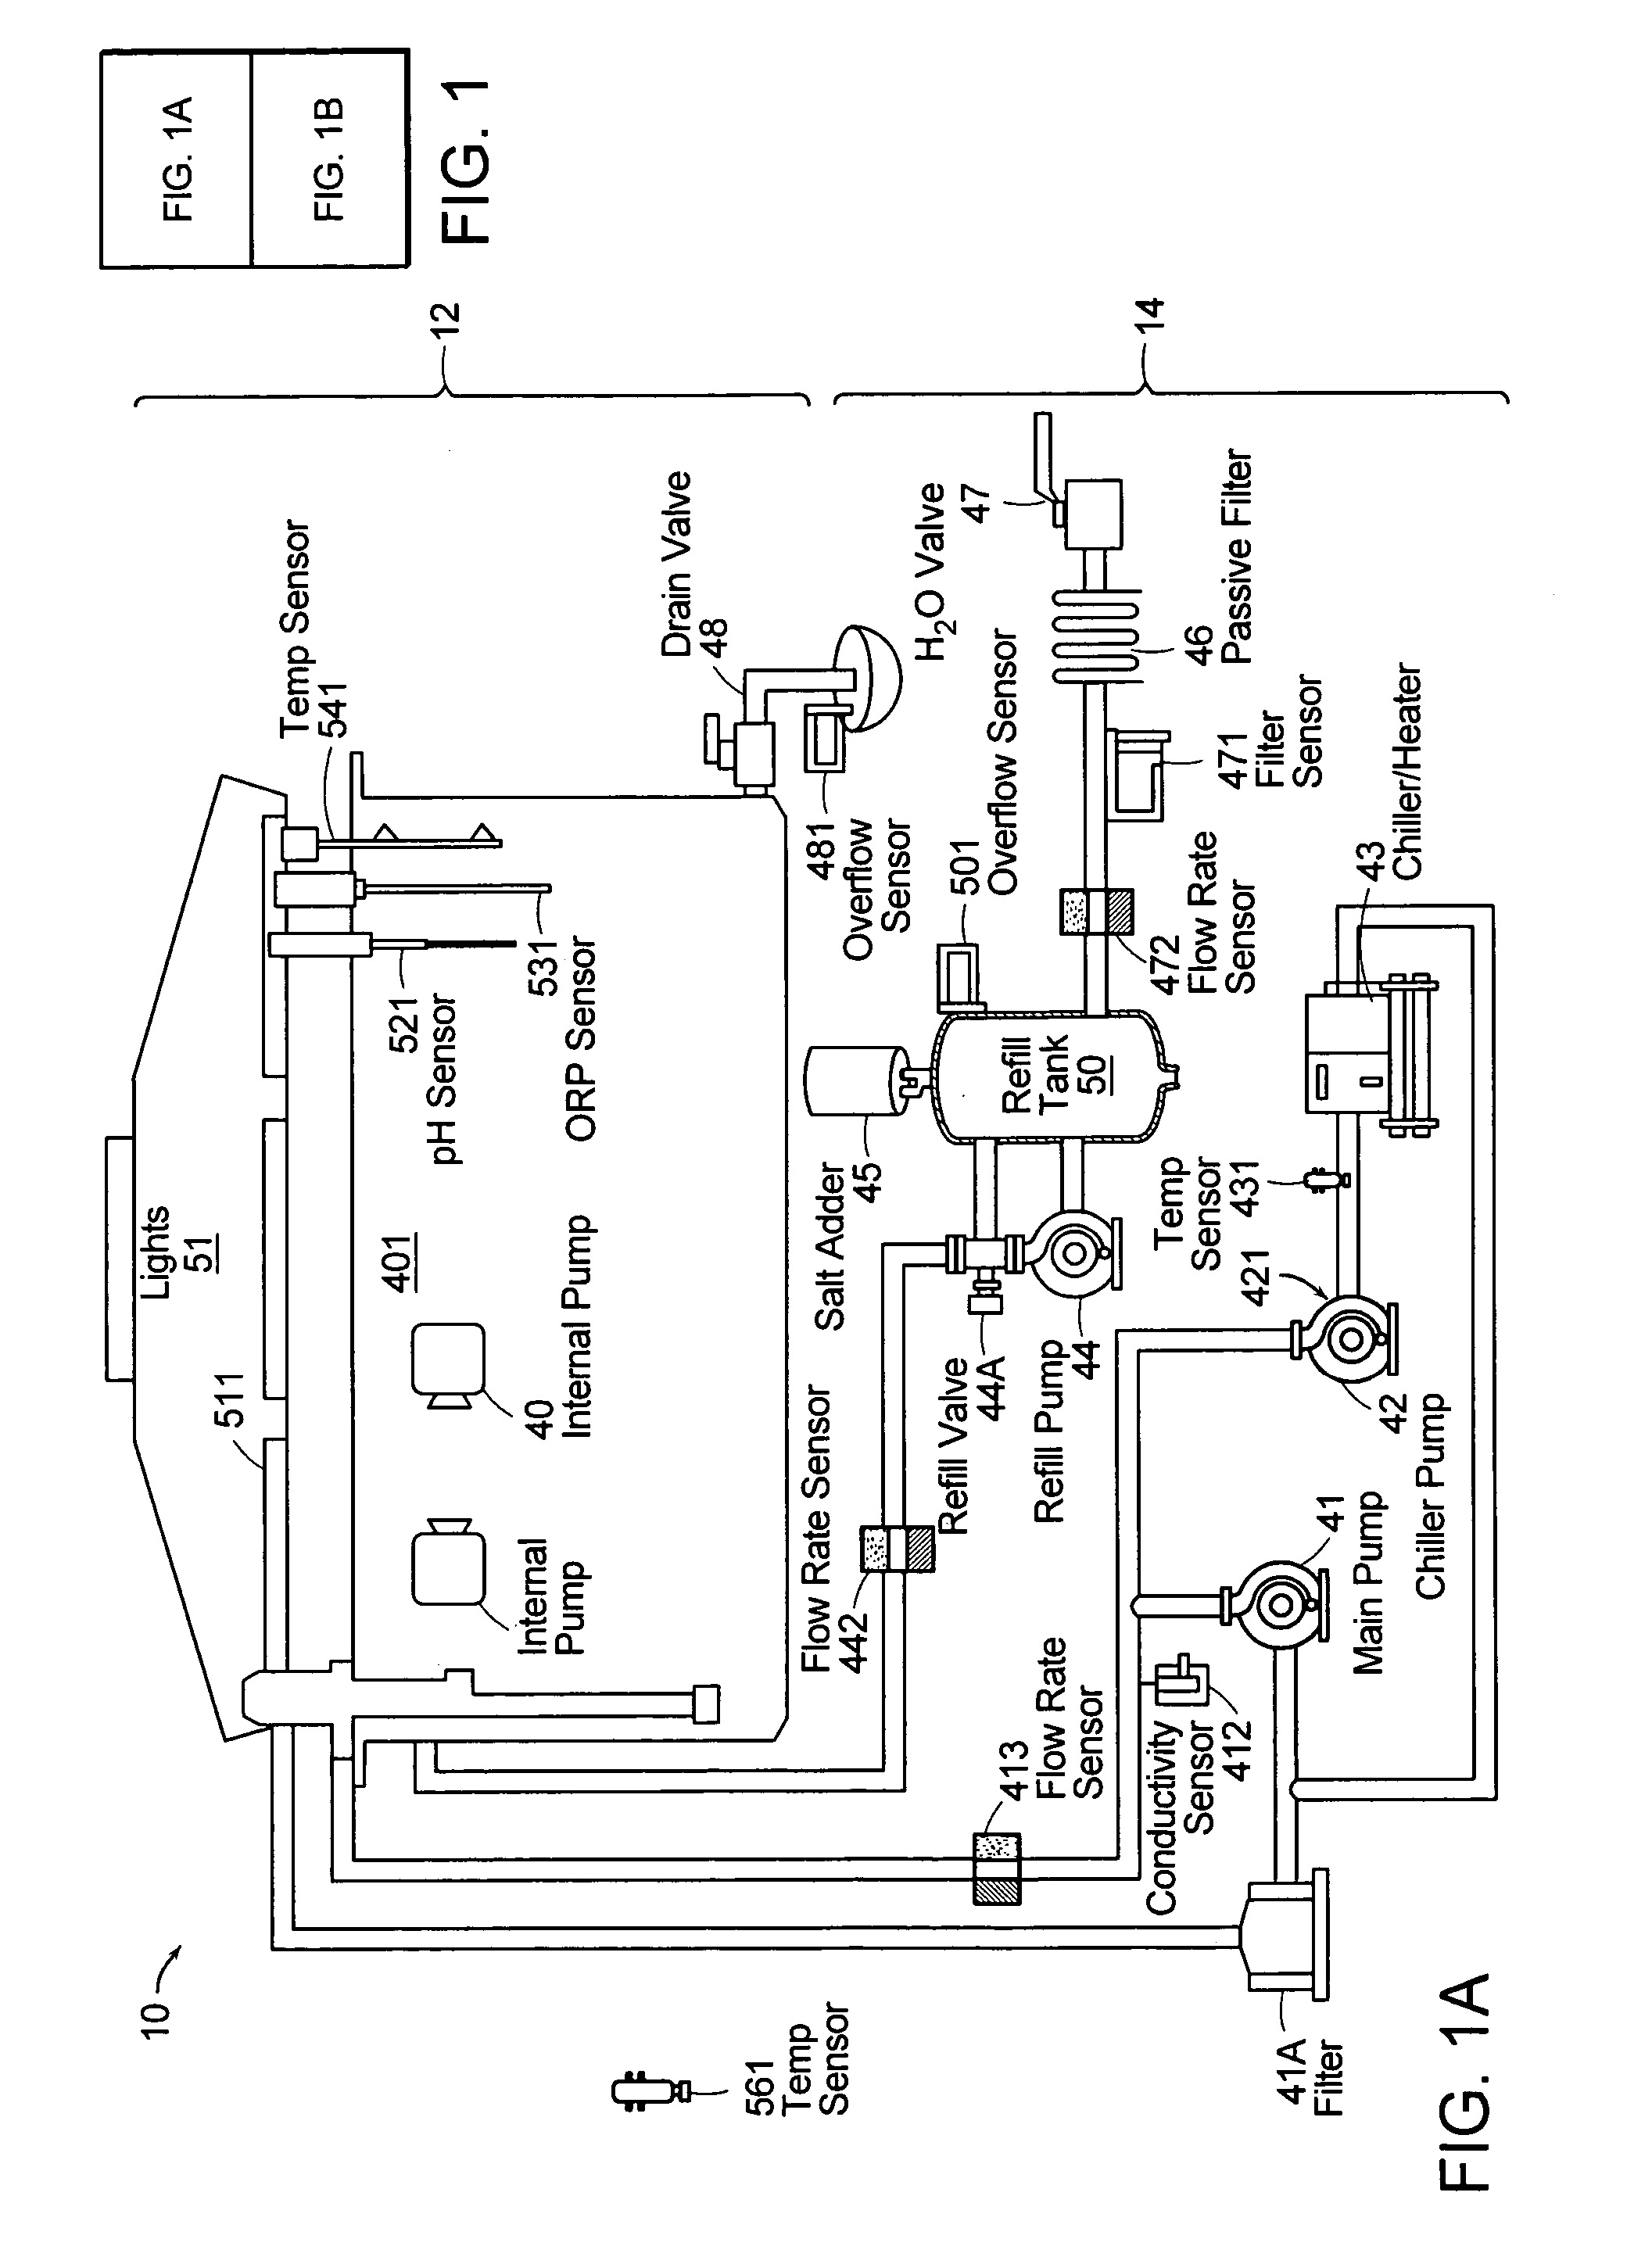 System and method for monitoring and controlling an aquatic environment